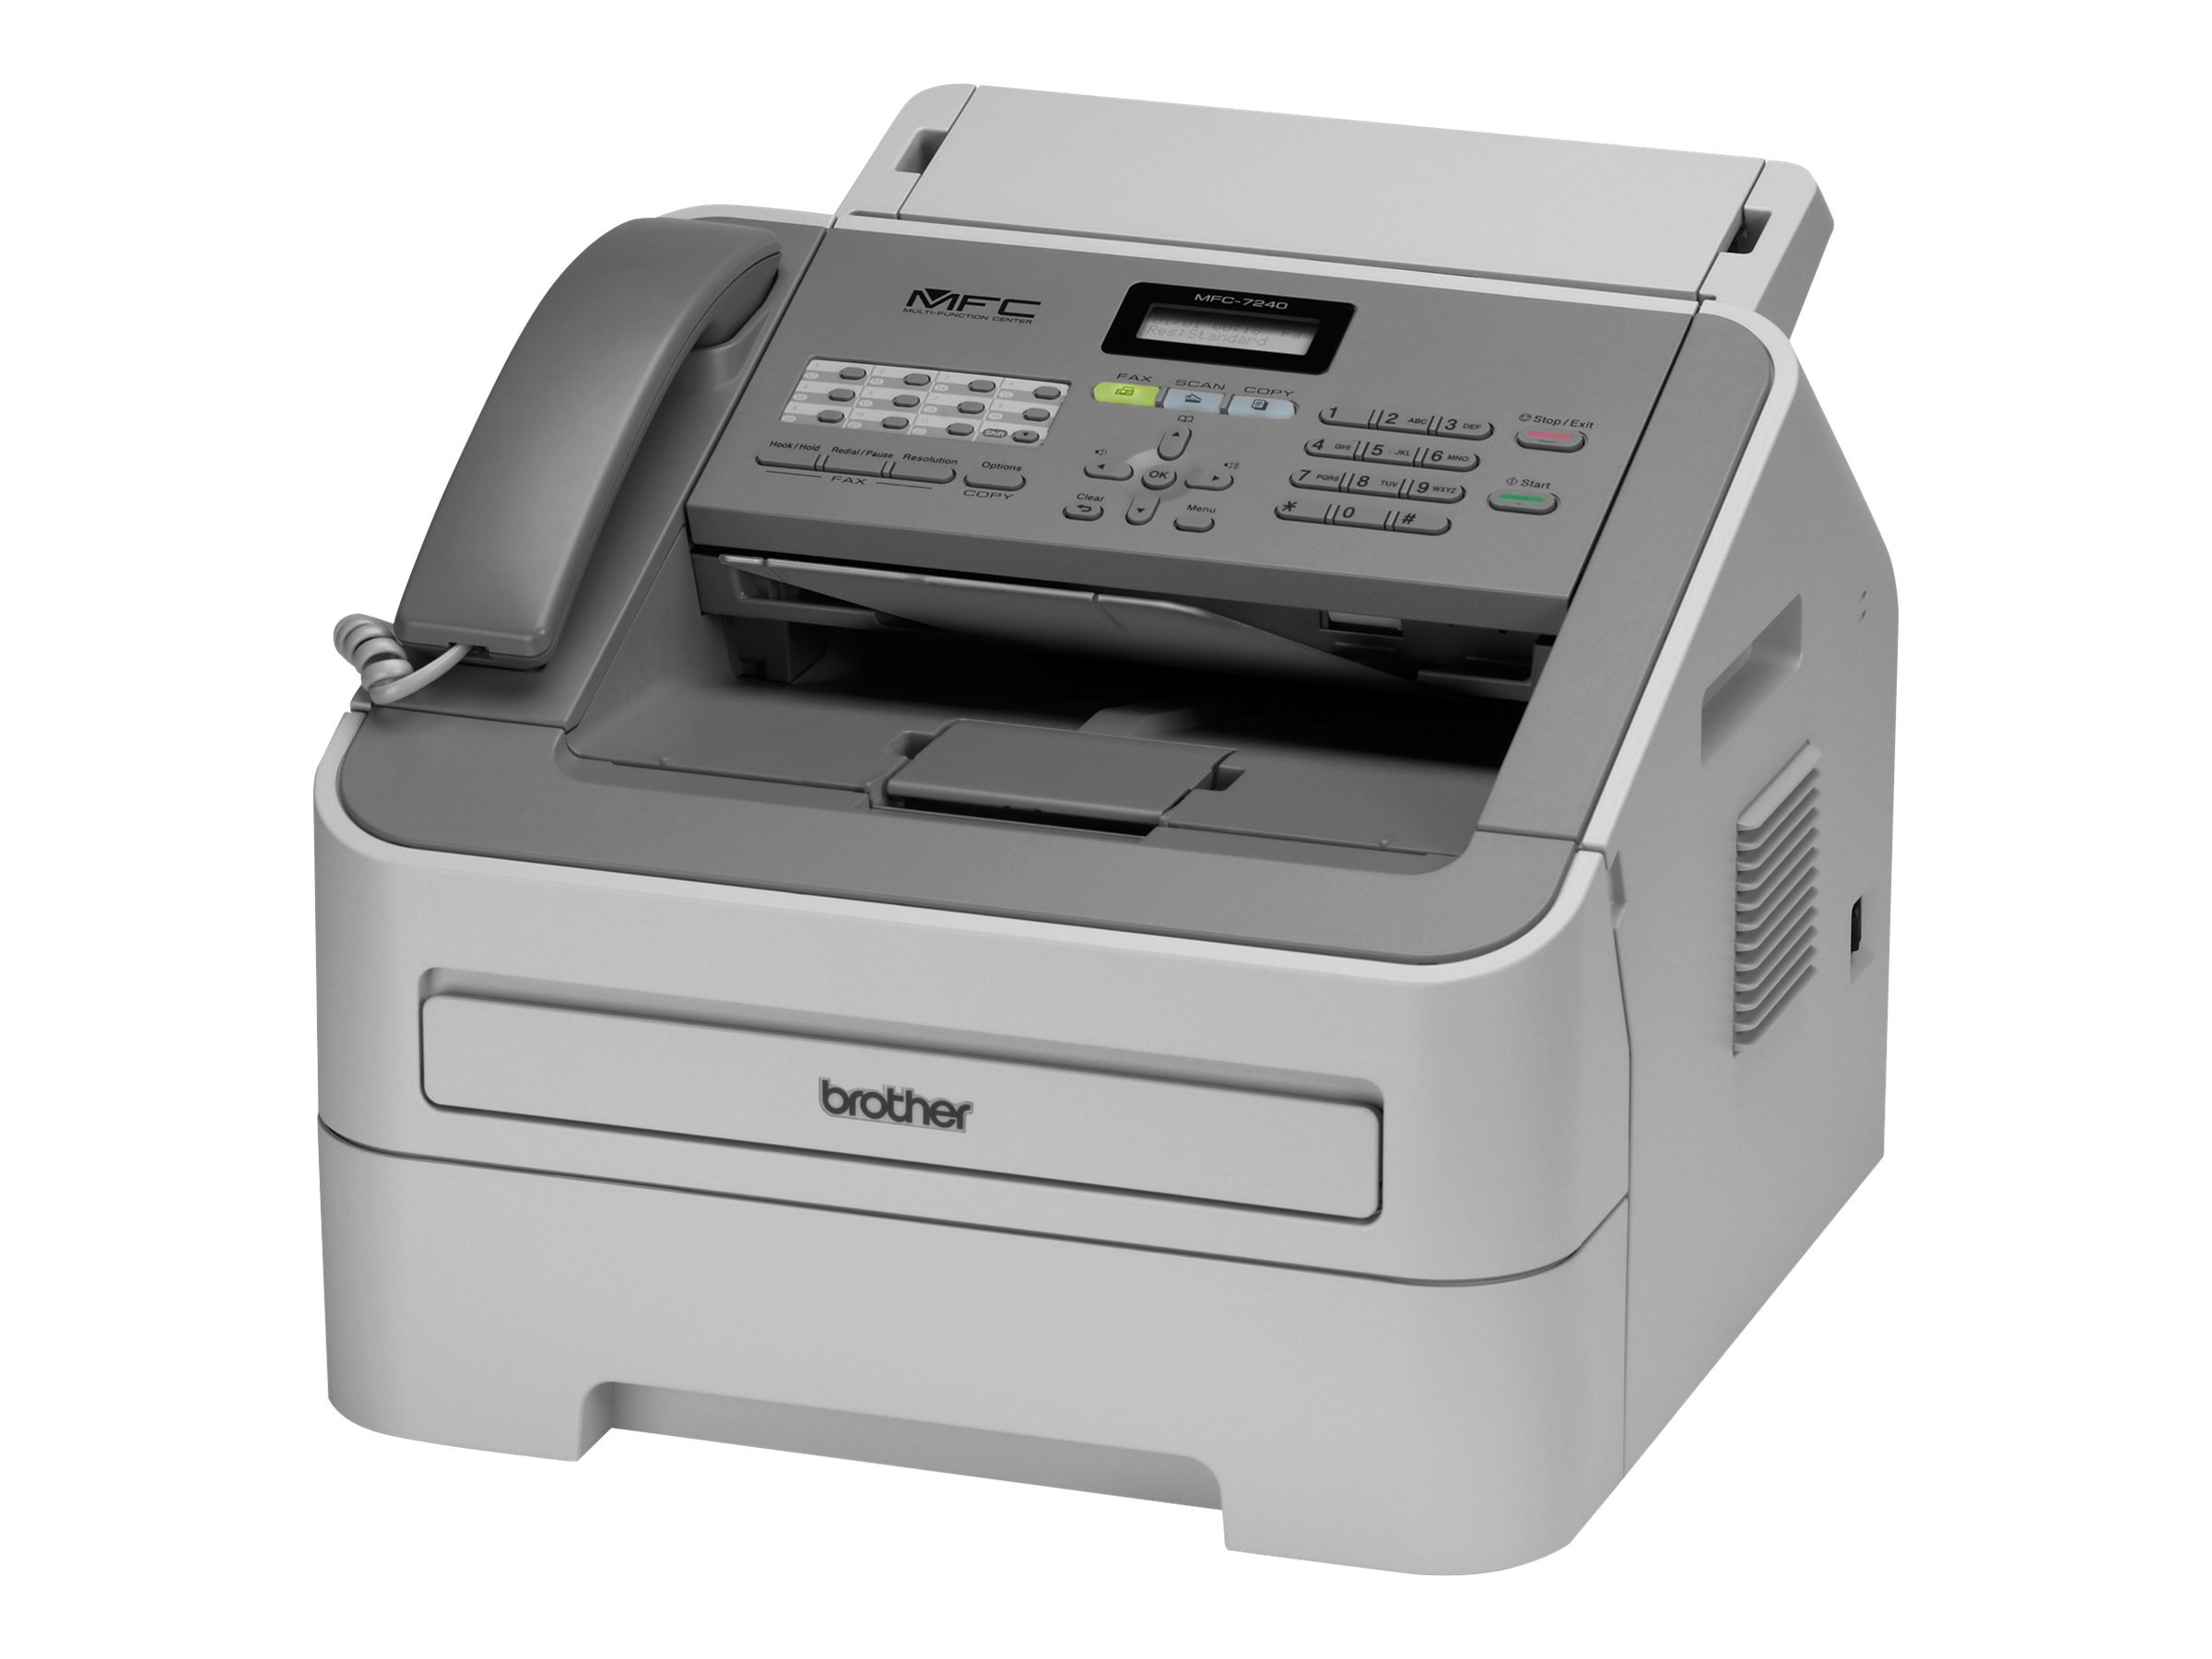 Brother mfc-7860dw ocr software download